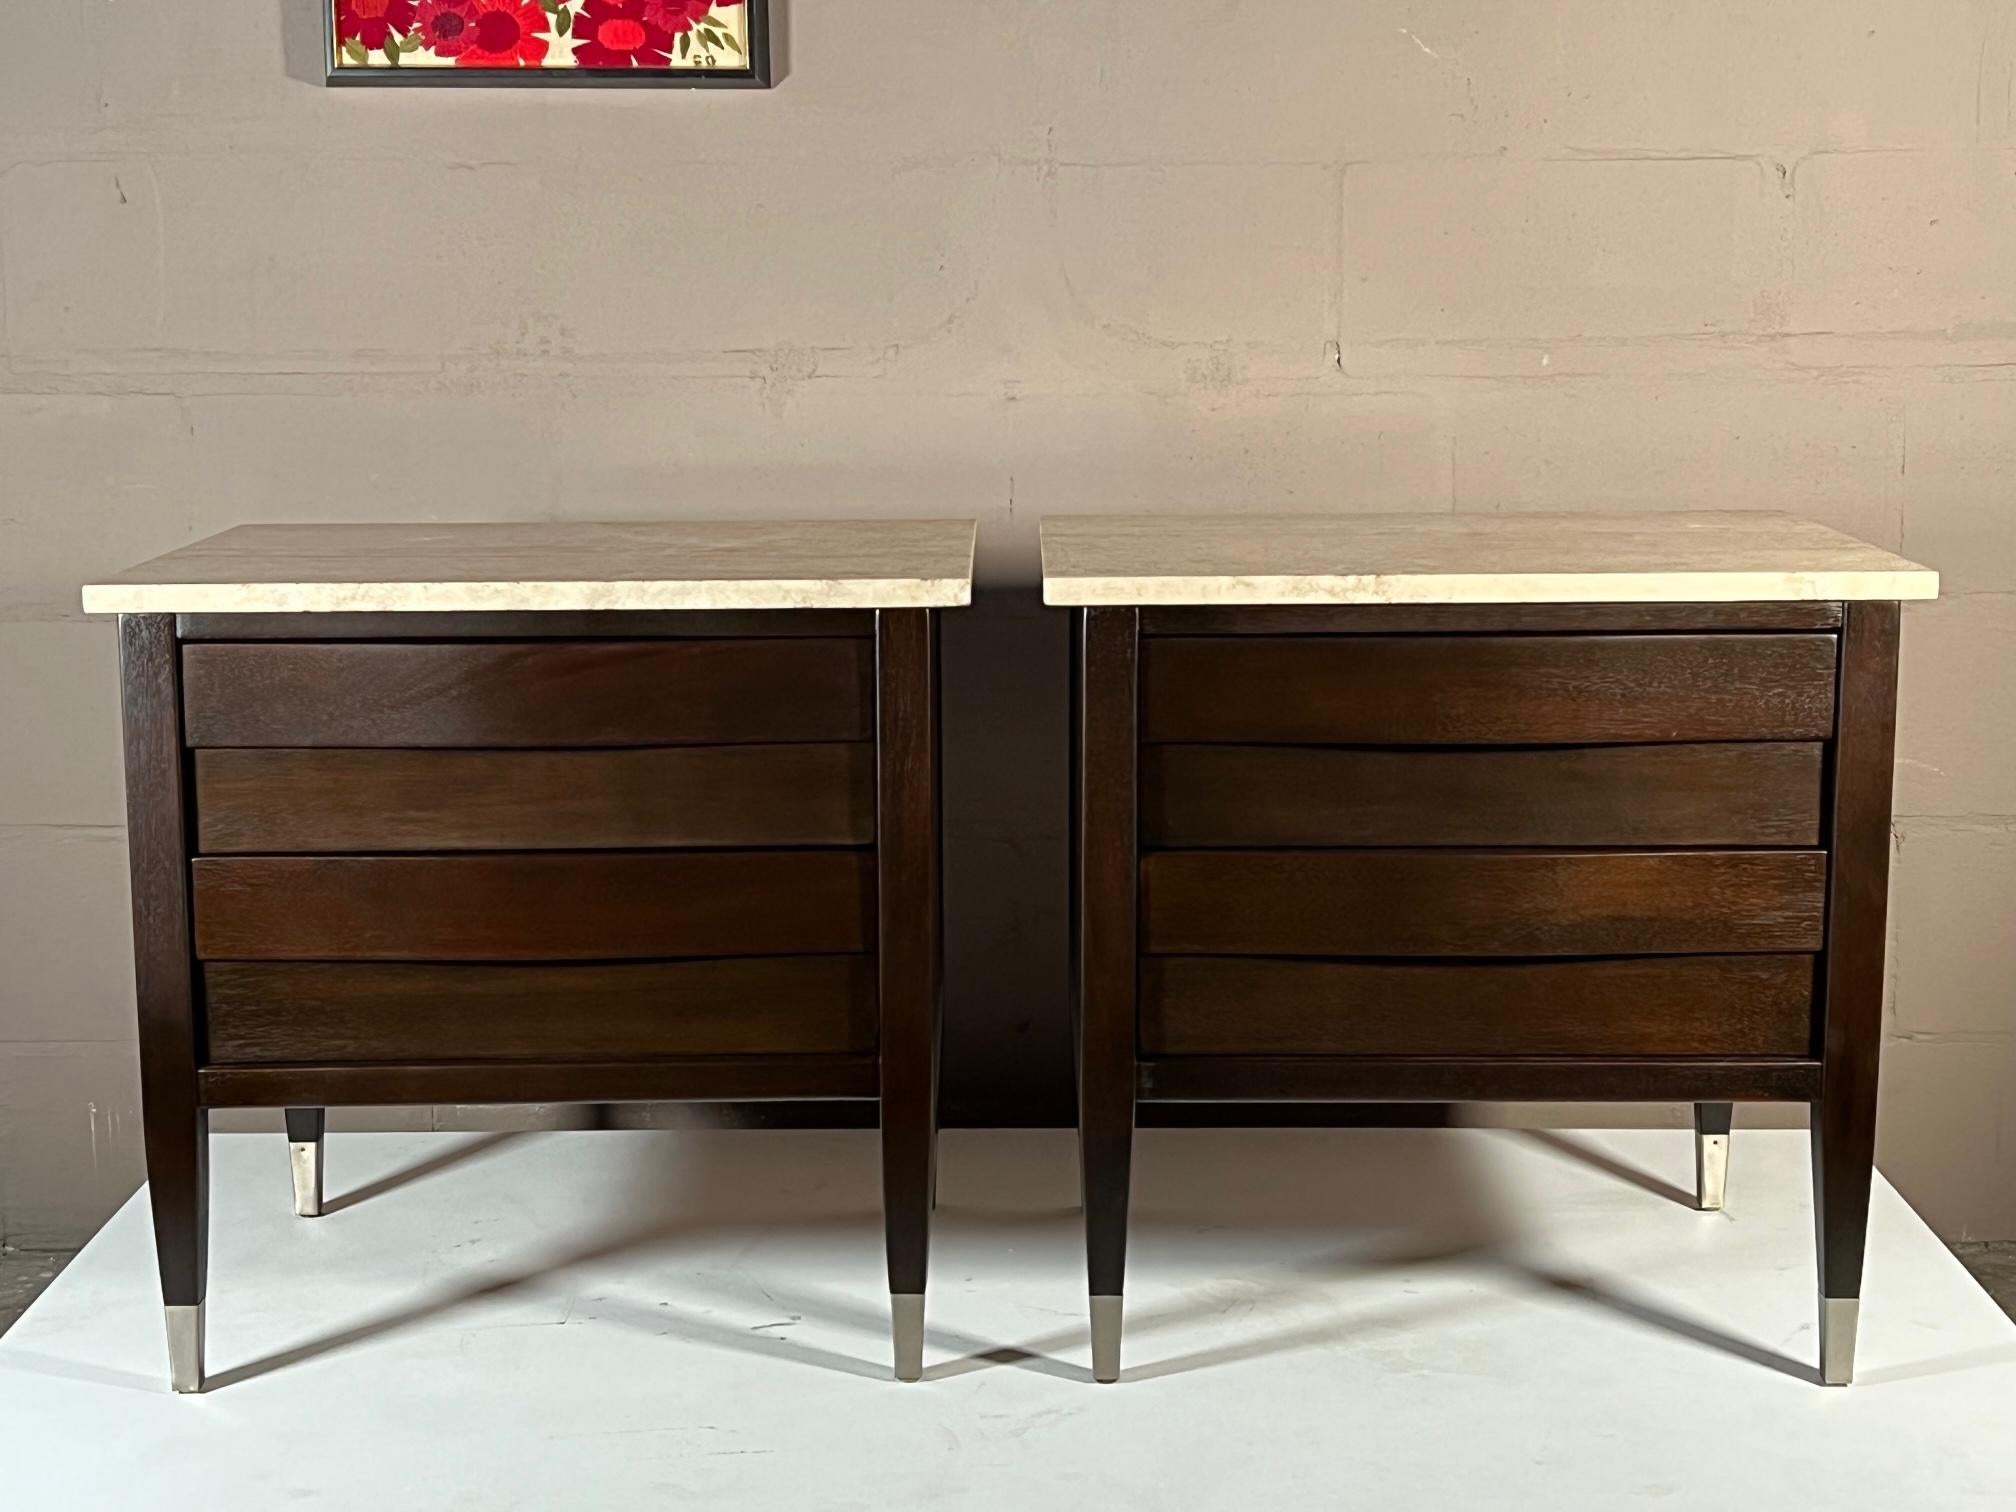 Classic and elegant mid century night stands by American of Martinsville. Reminiscient of Gio Ponti style, they have tapered legs with sabots, travertine tops-made in Italy, bowed drawer fronts are an additional feature. Refinished in a dark brown